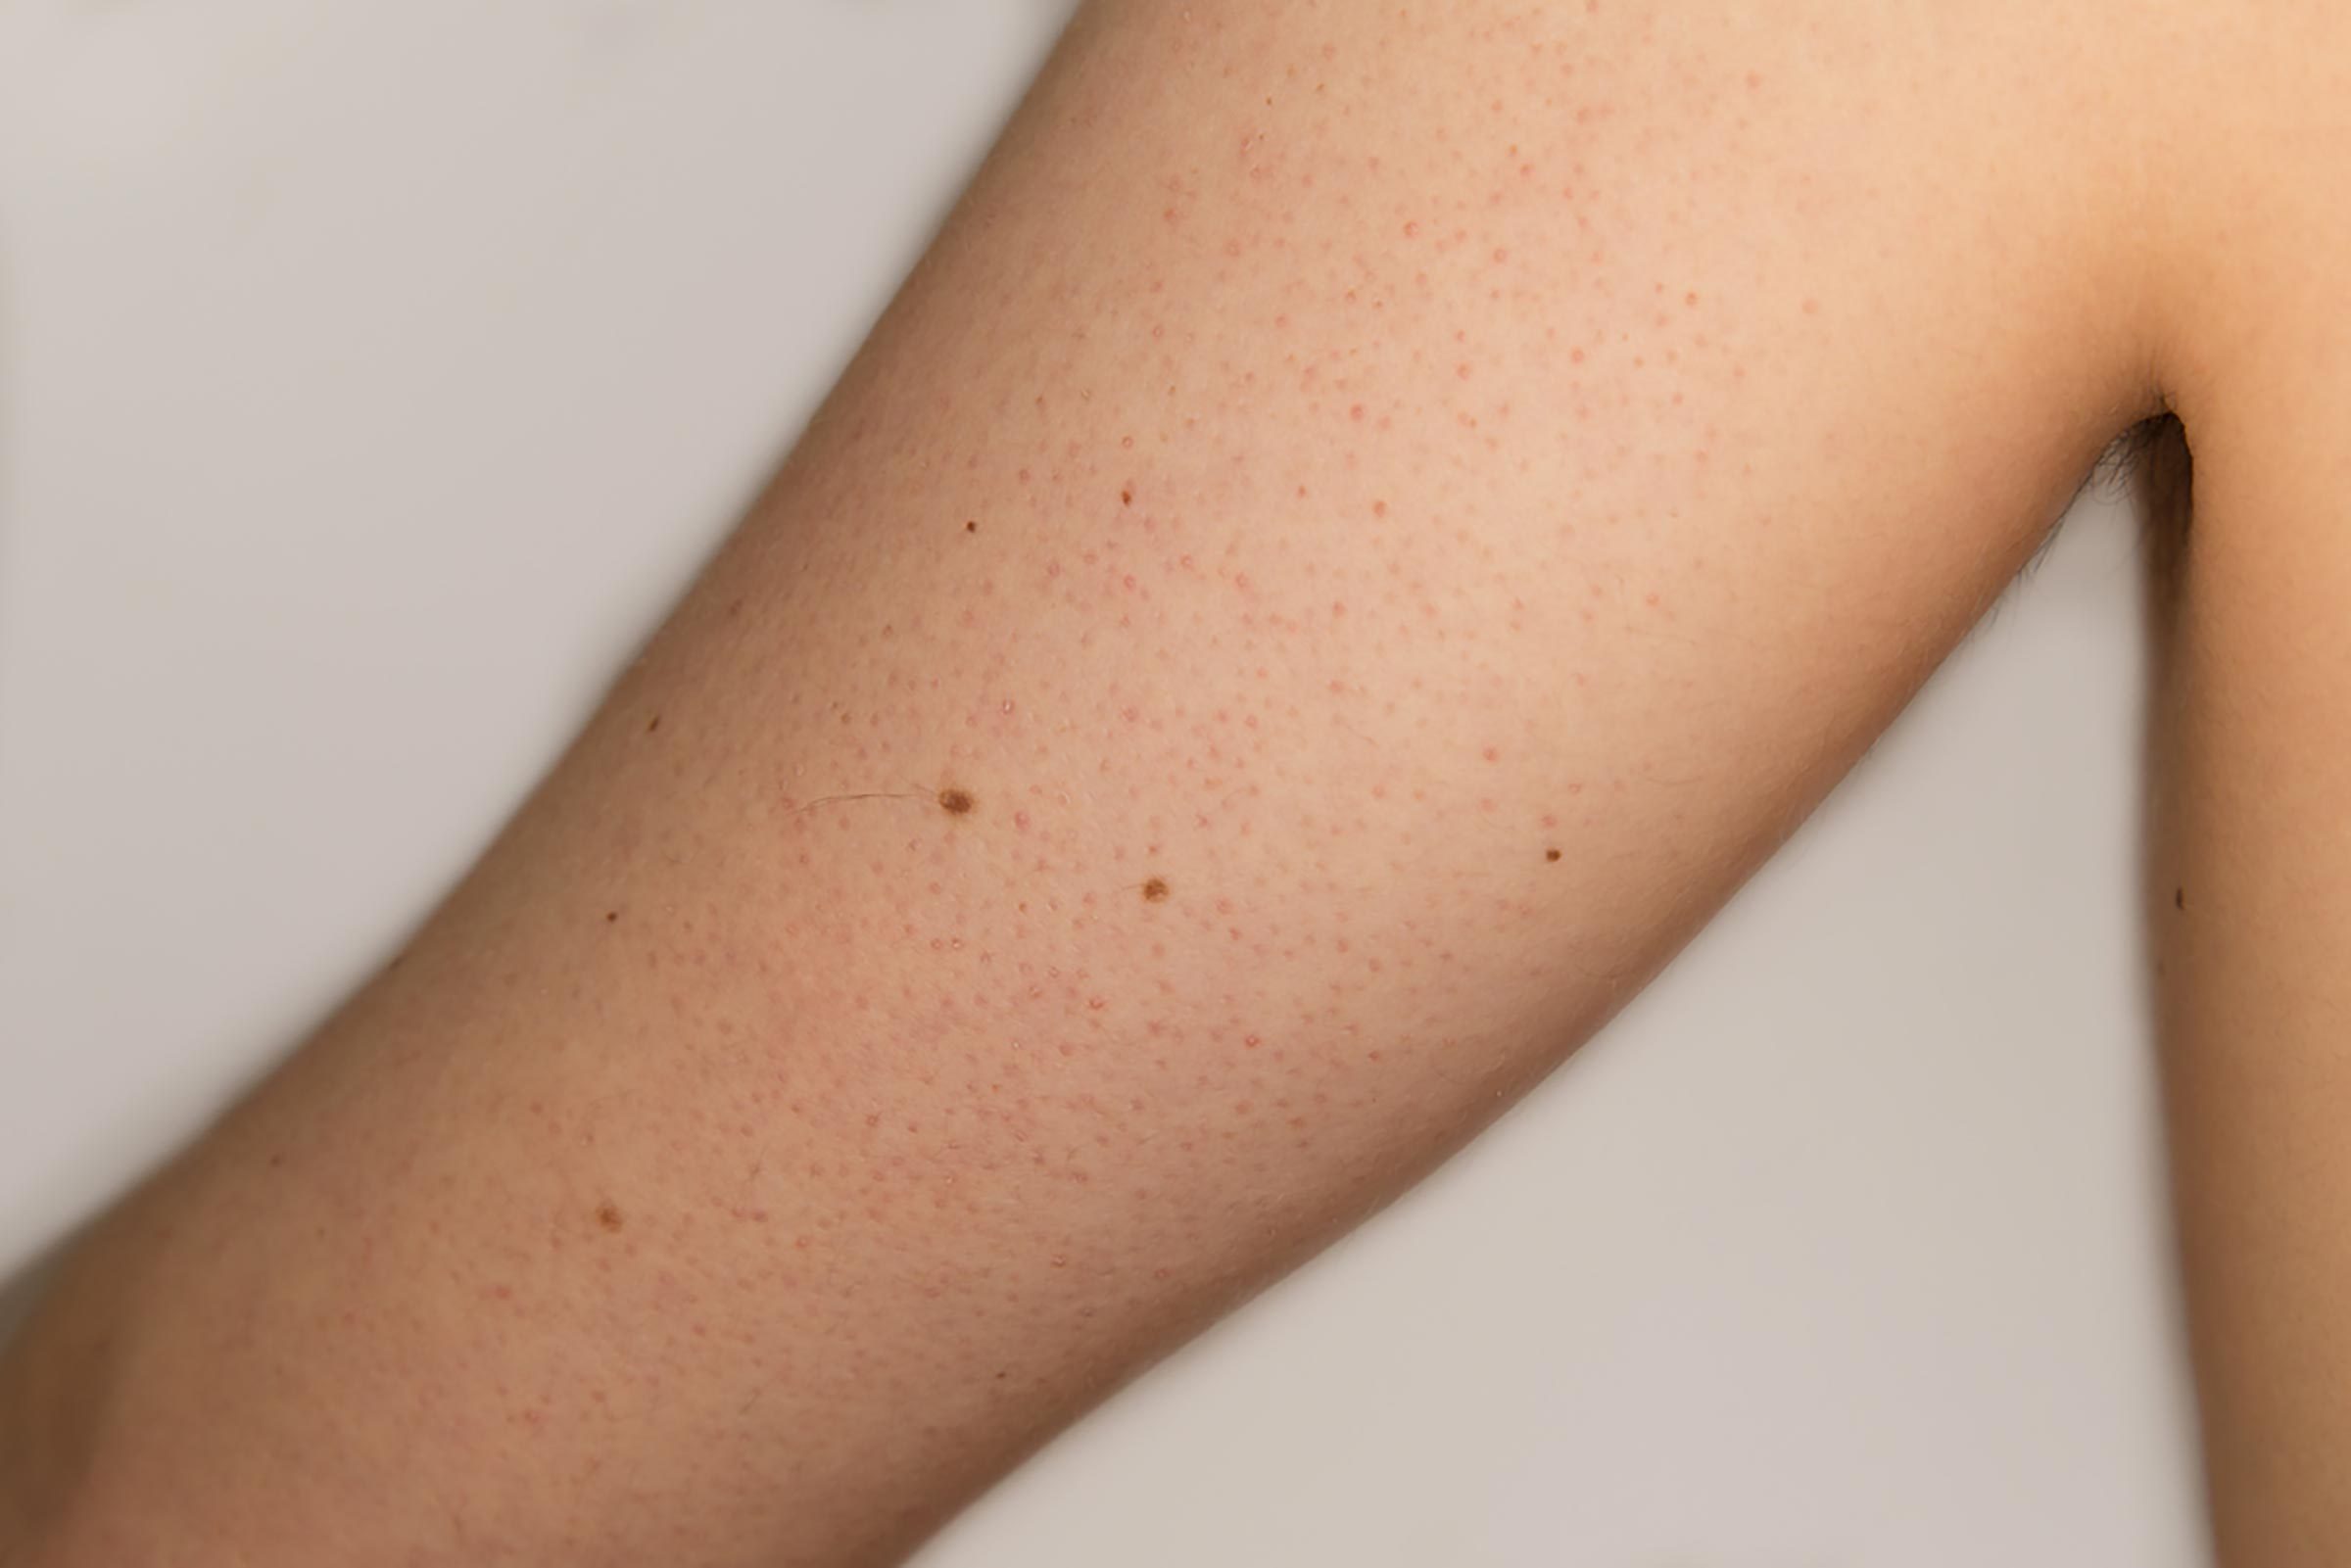 Bumps On Skin Skin Mysteries Explained The Healthy